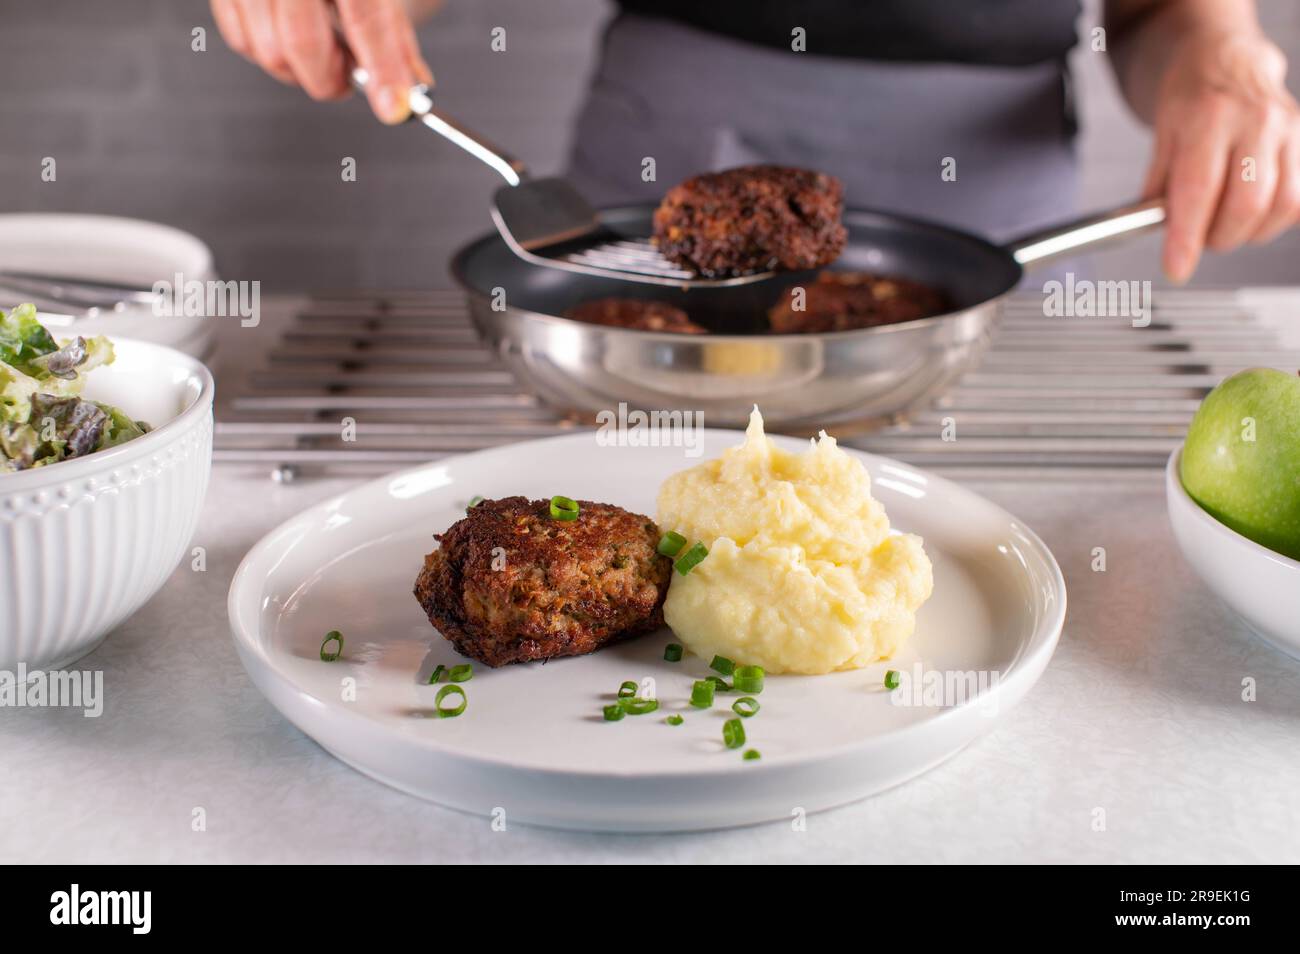 Woman with apron serving meatballs from a frying pan on a plate Stock Photo